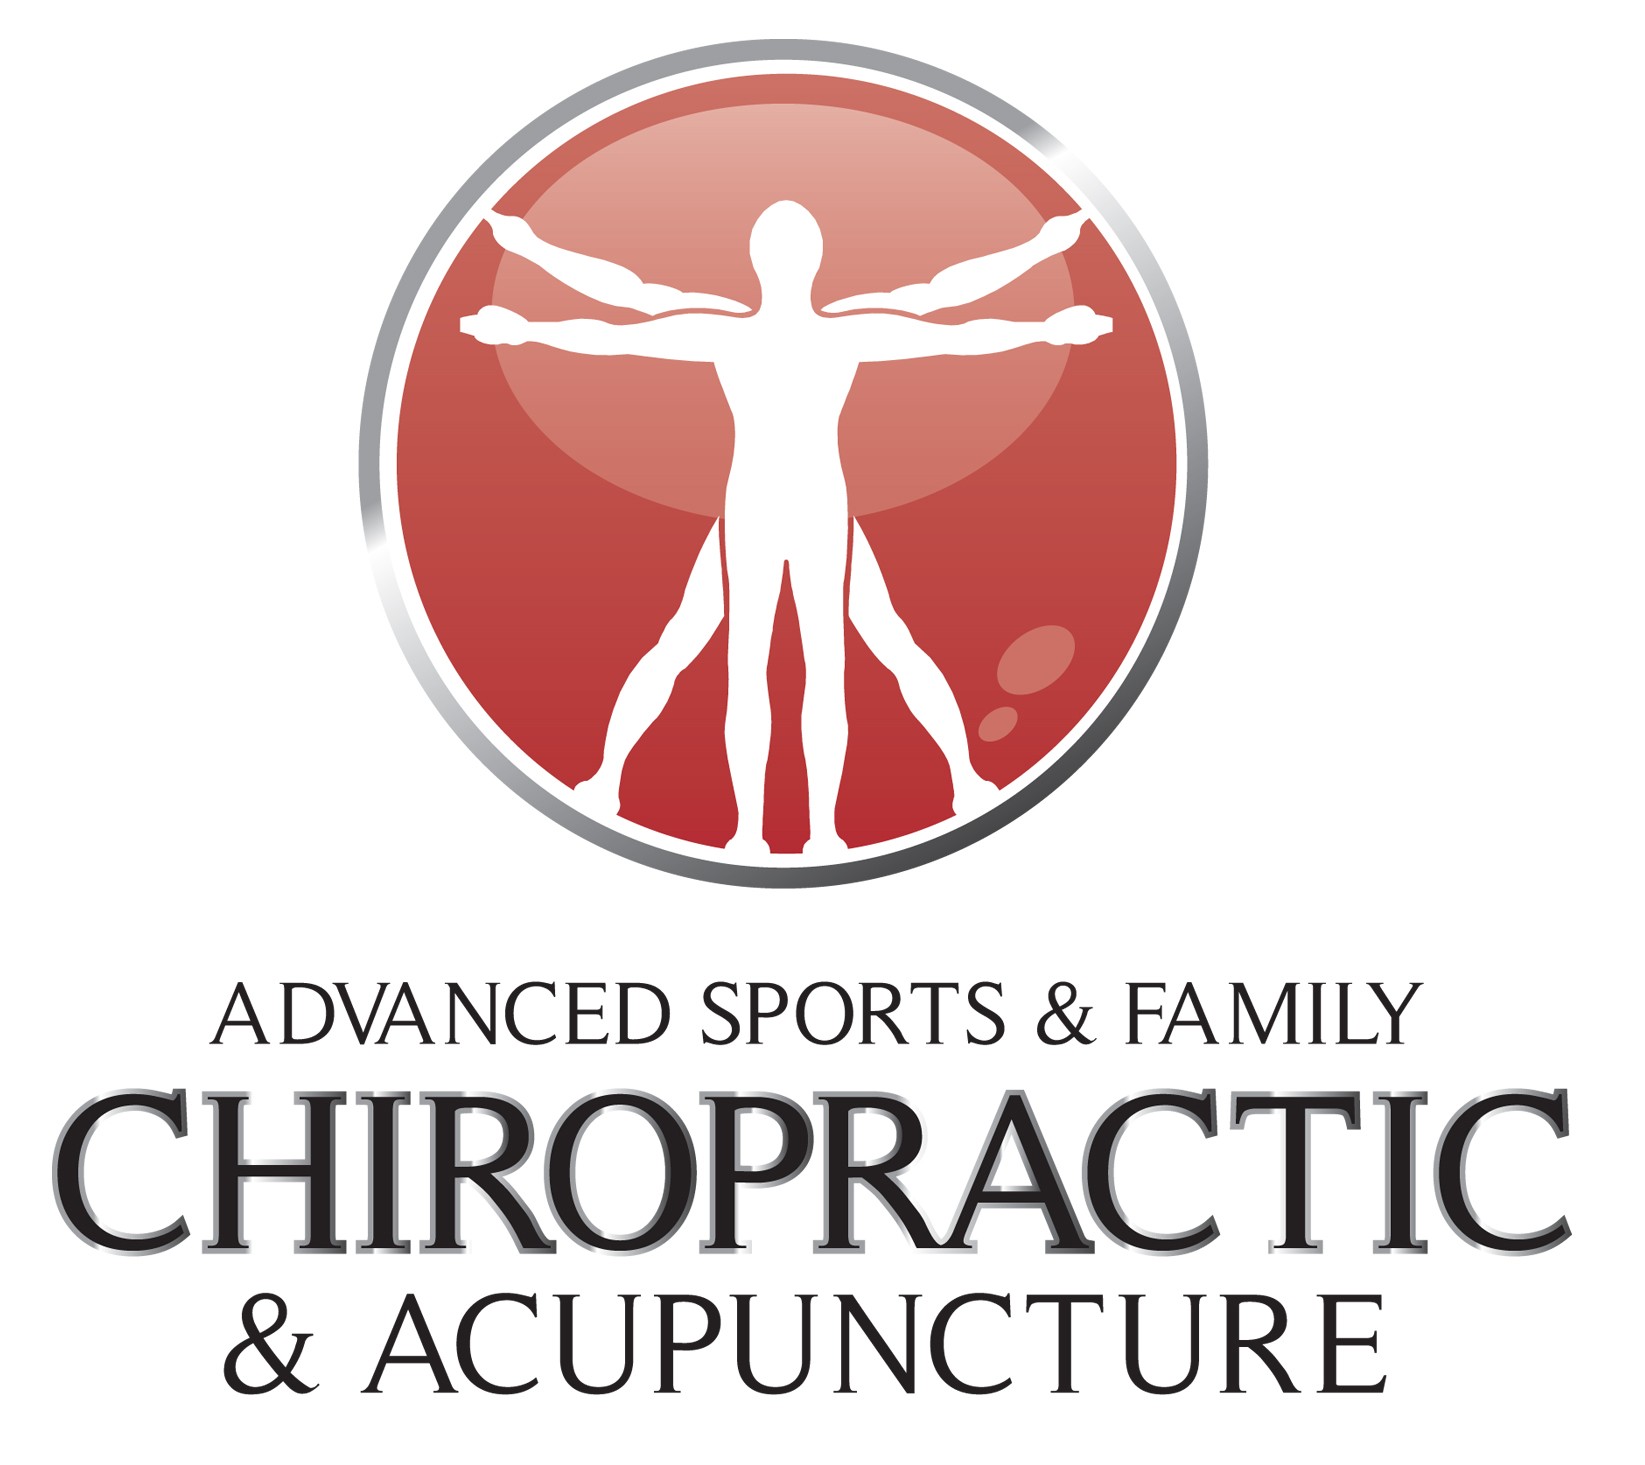 Advanced Sports & Family Chiropractic